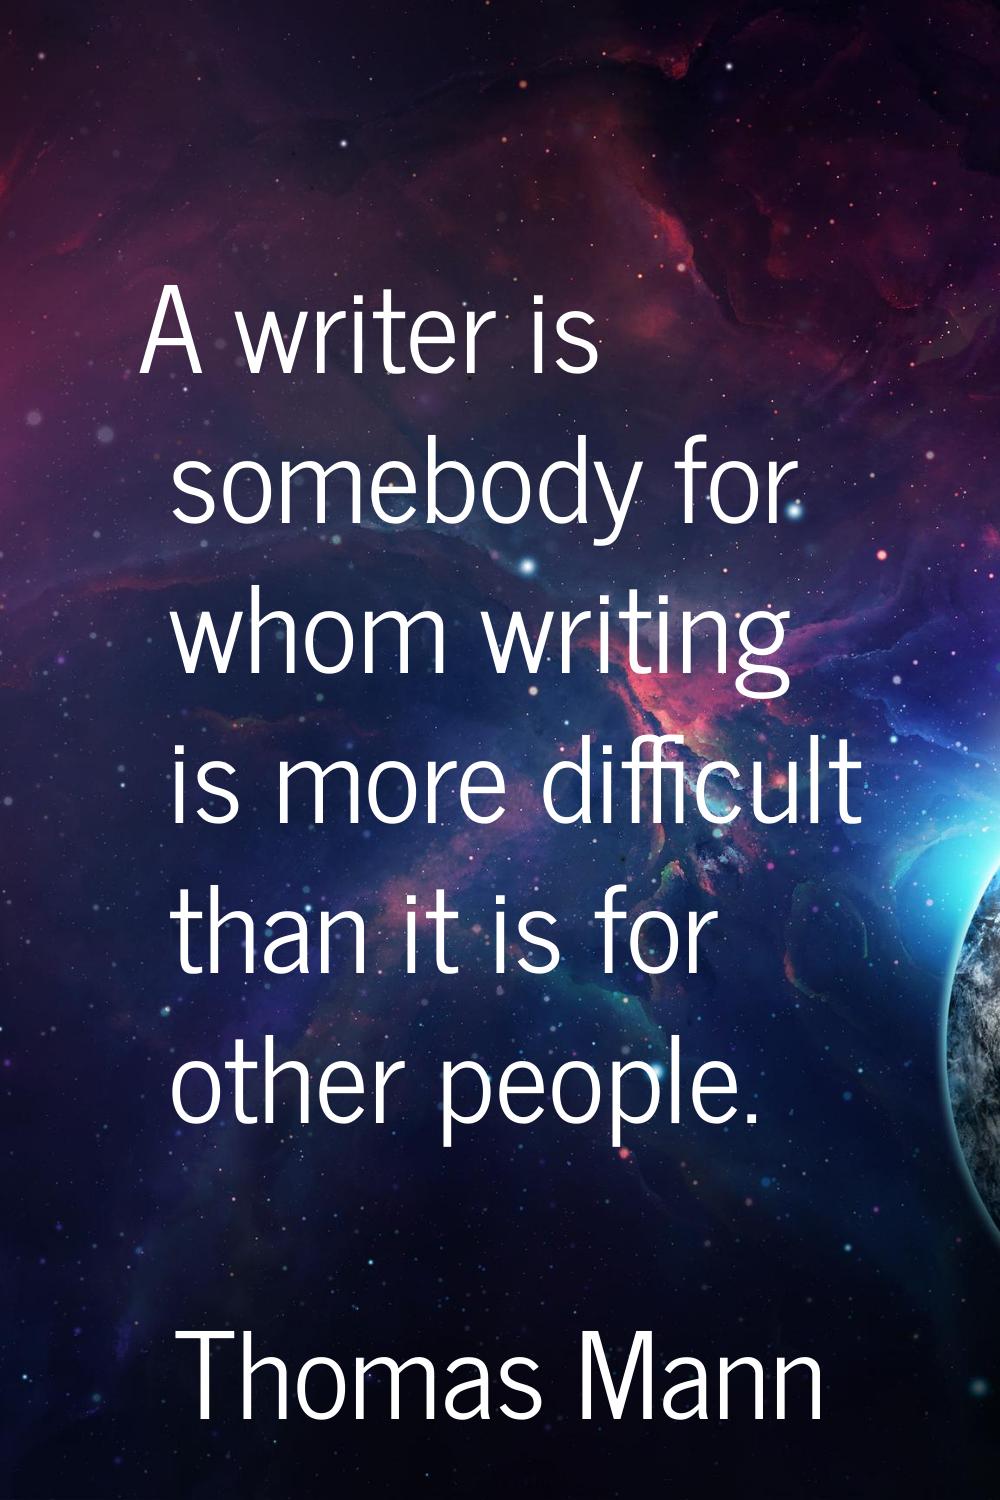 A writer is somebody for whom writing is more difficult than it is for other people.